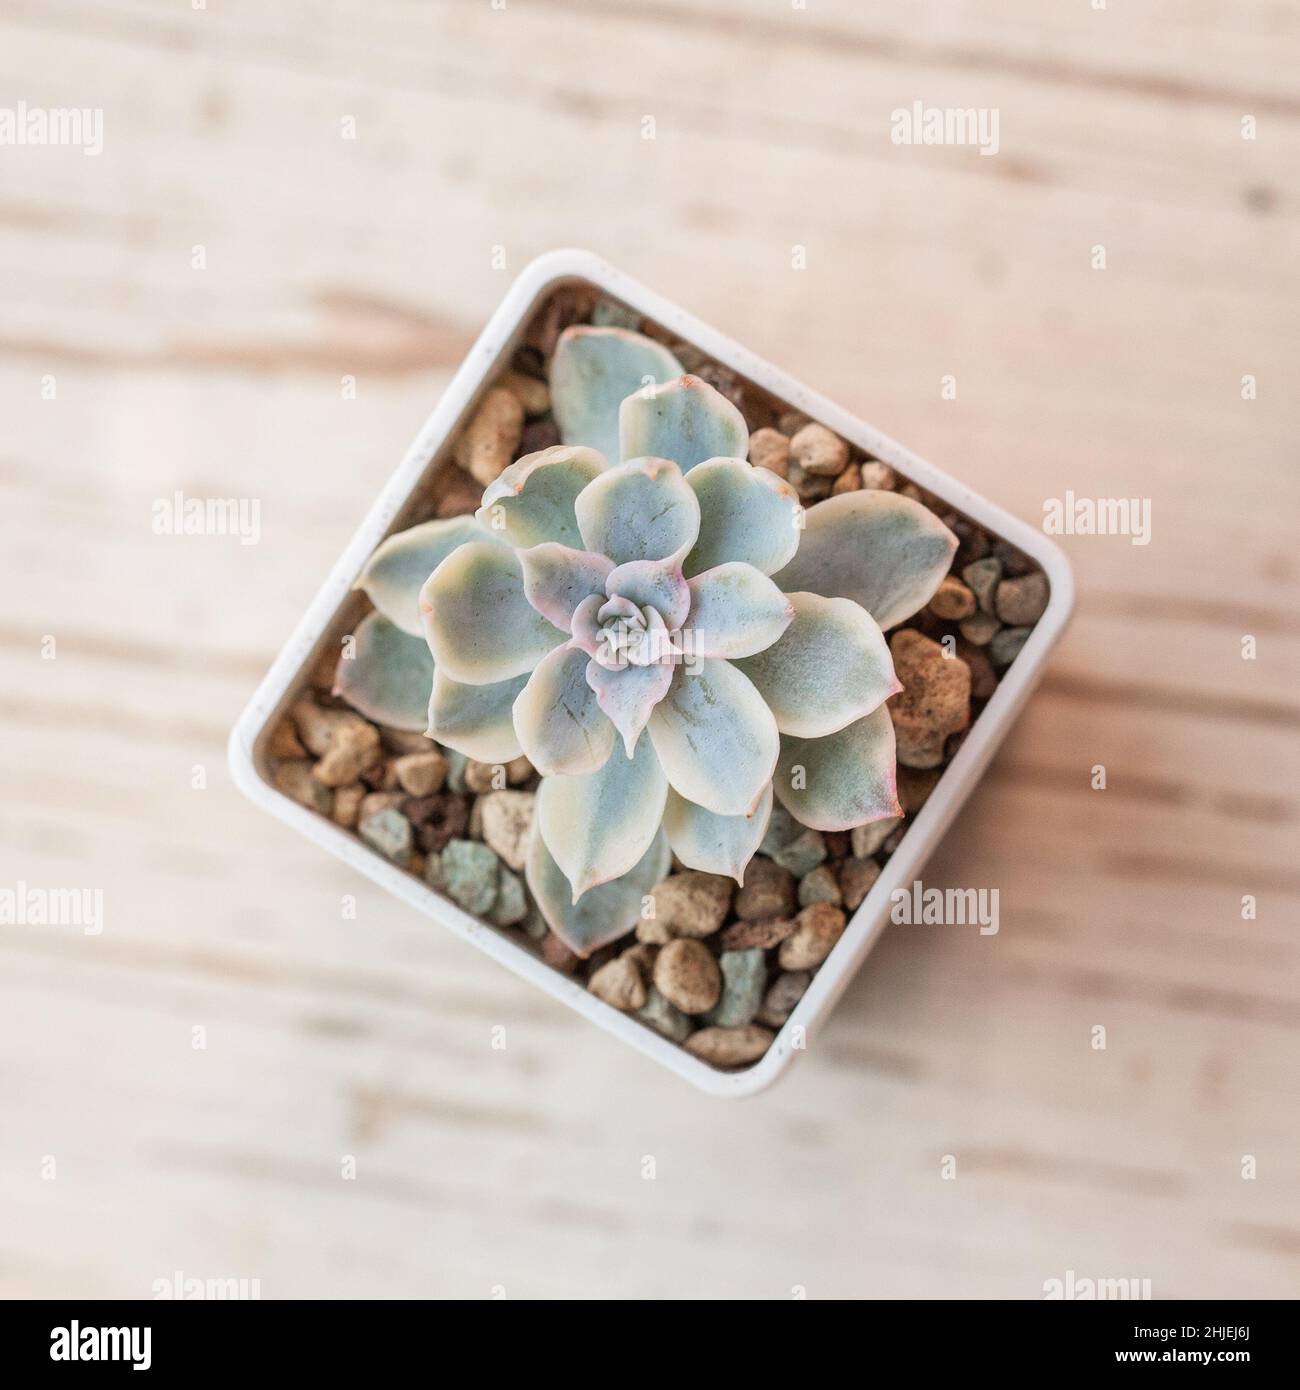 Echeveria subsessilis variegated, top view Stock Photo